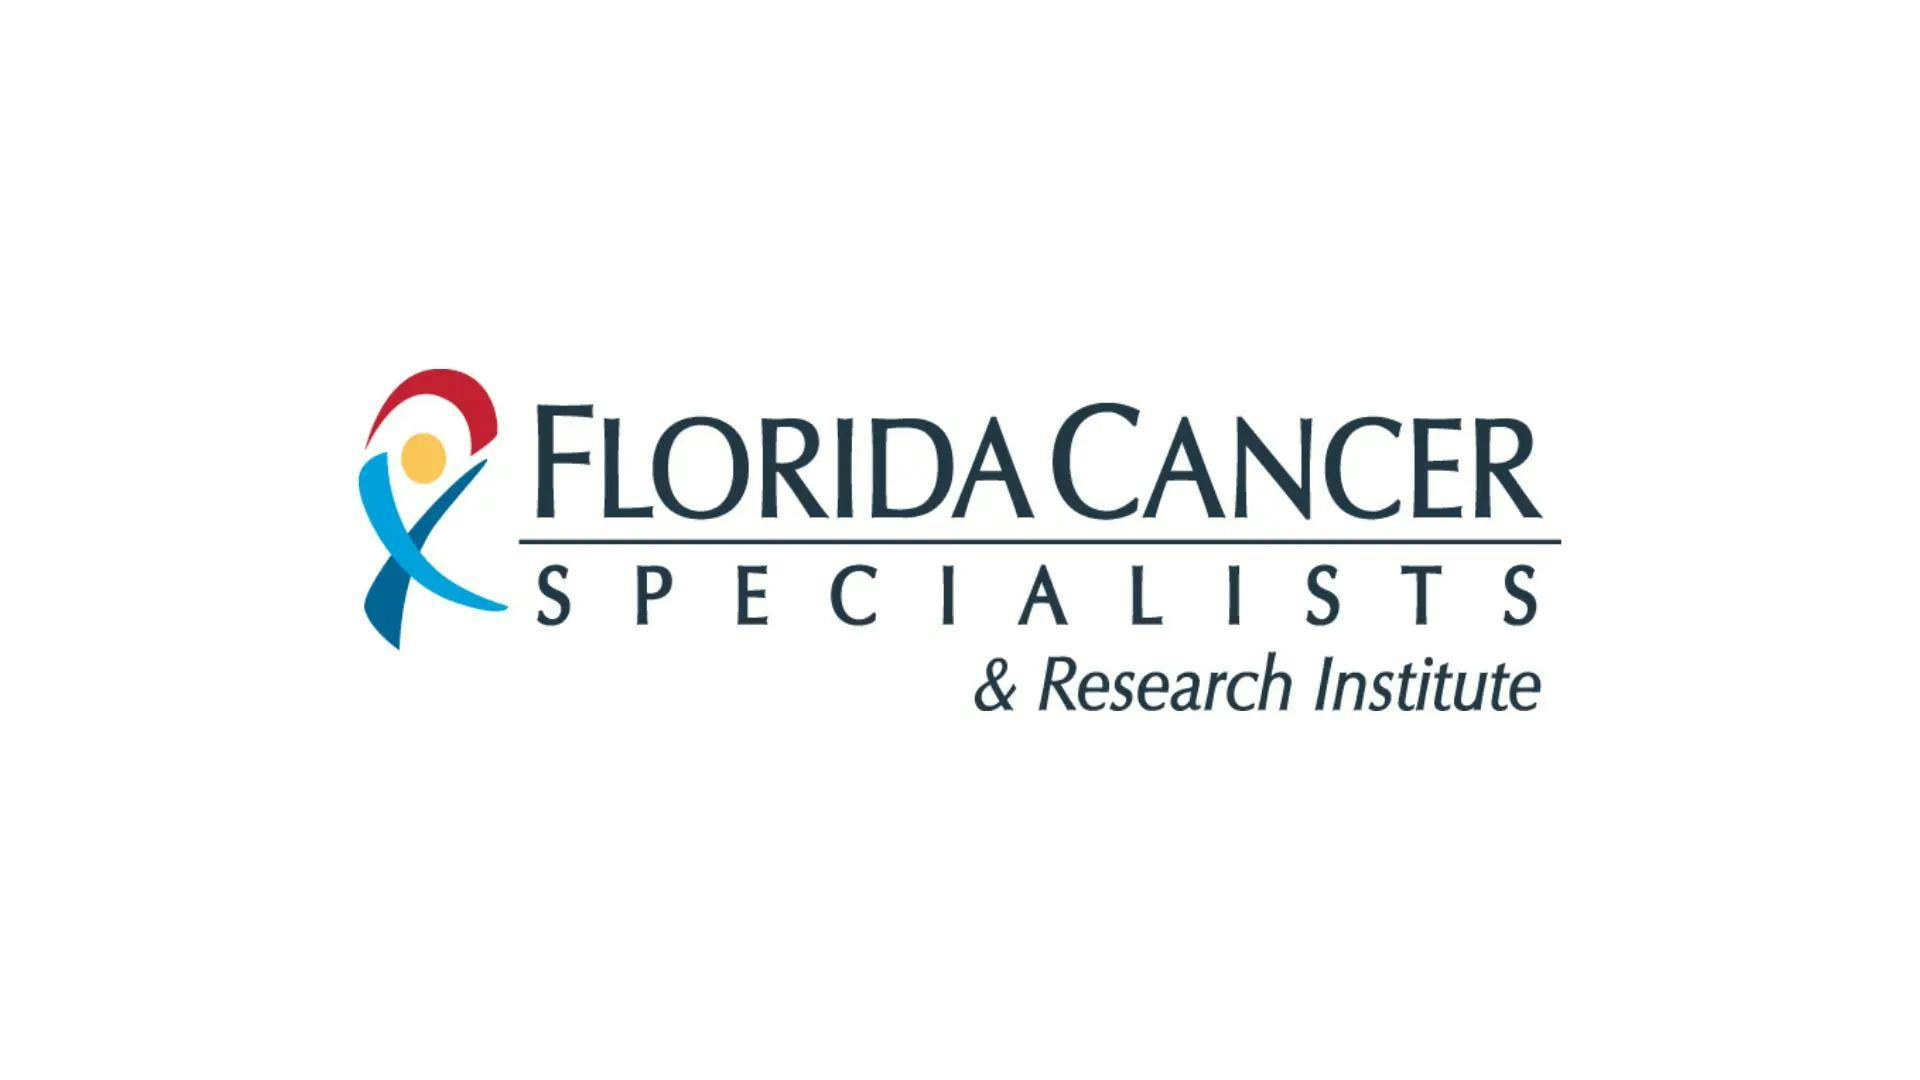 Florida Cancer Specialists & Research Institute President Michael Diaz, MD Joins U.S. Cancer Care Stakeholders To Review Oncology Payment Reform Initiatives